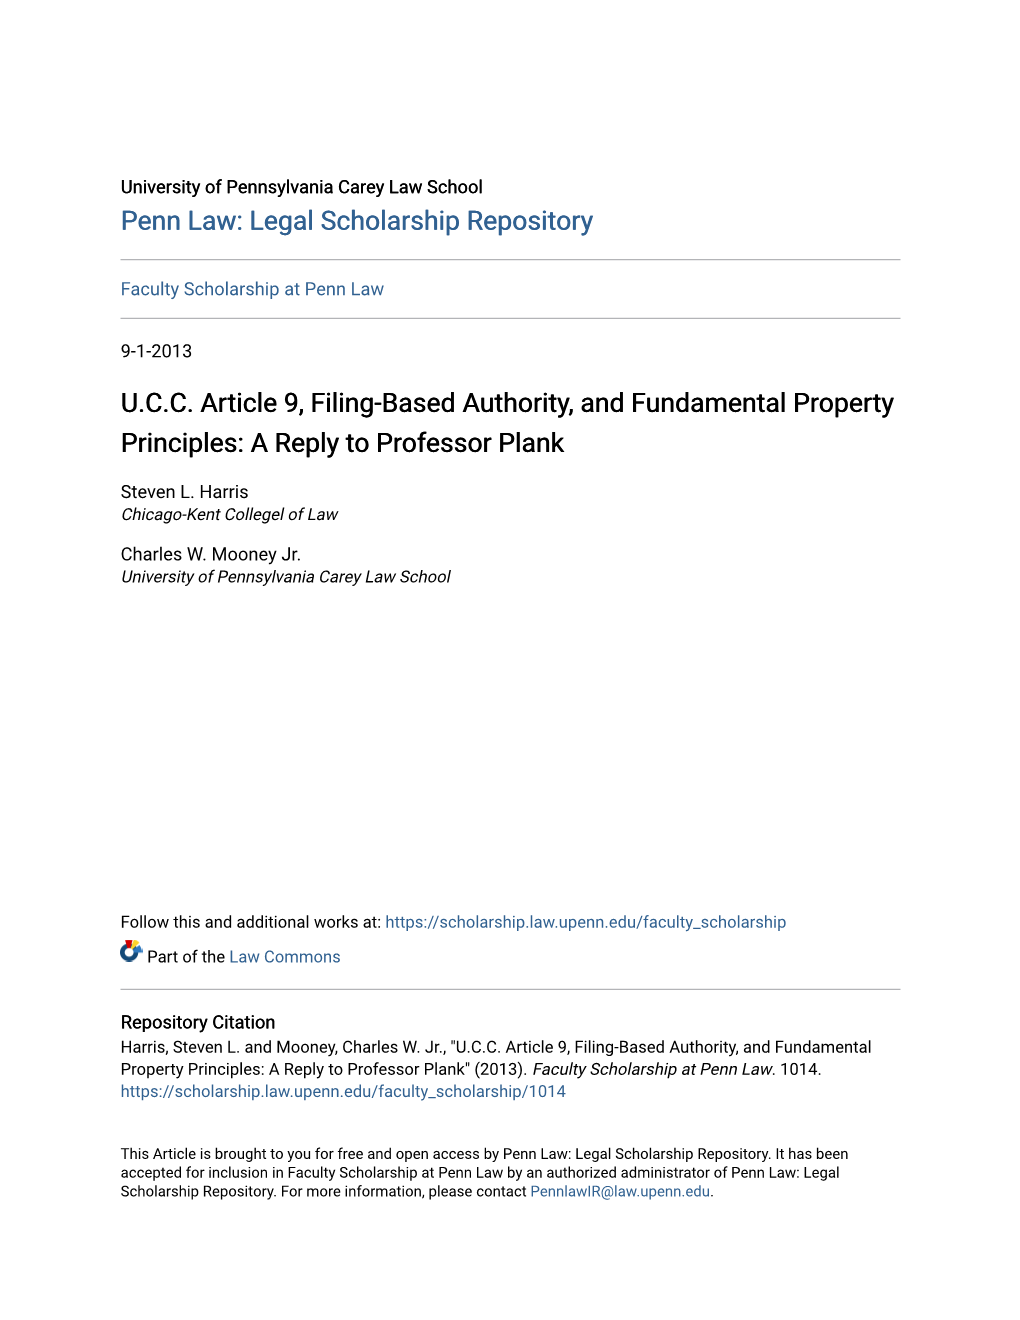 UCC Article 9, Filing-Based Authority, and Fundamental Property Principles